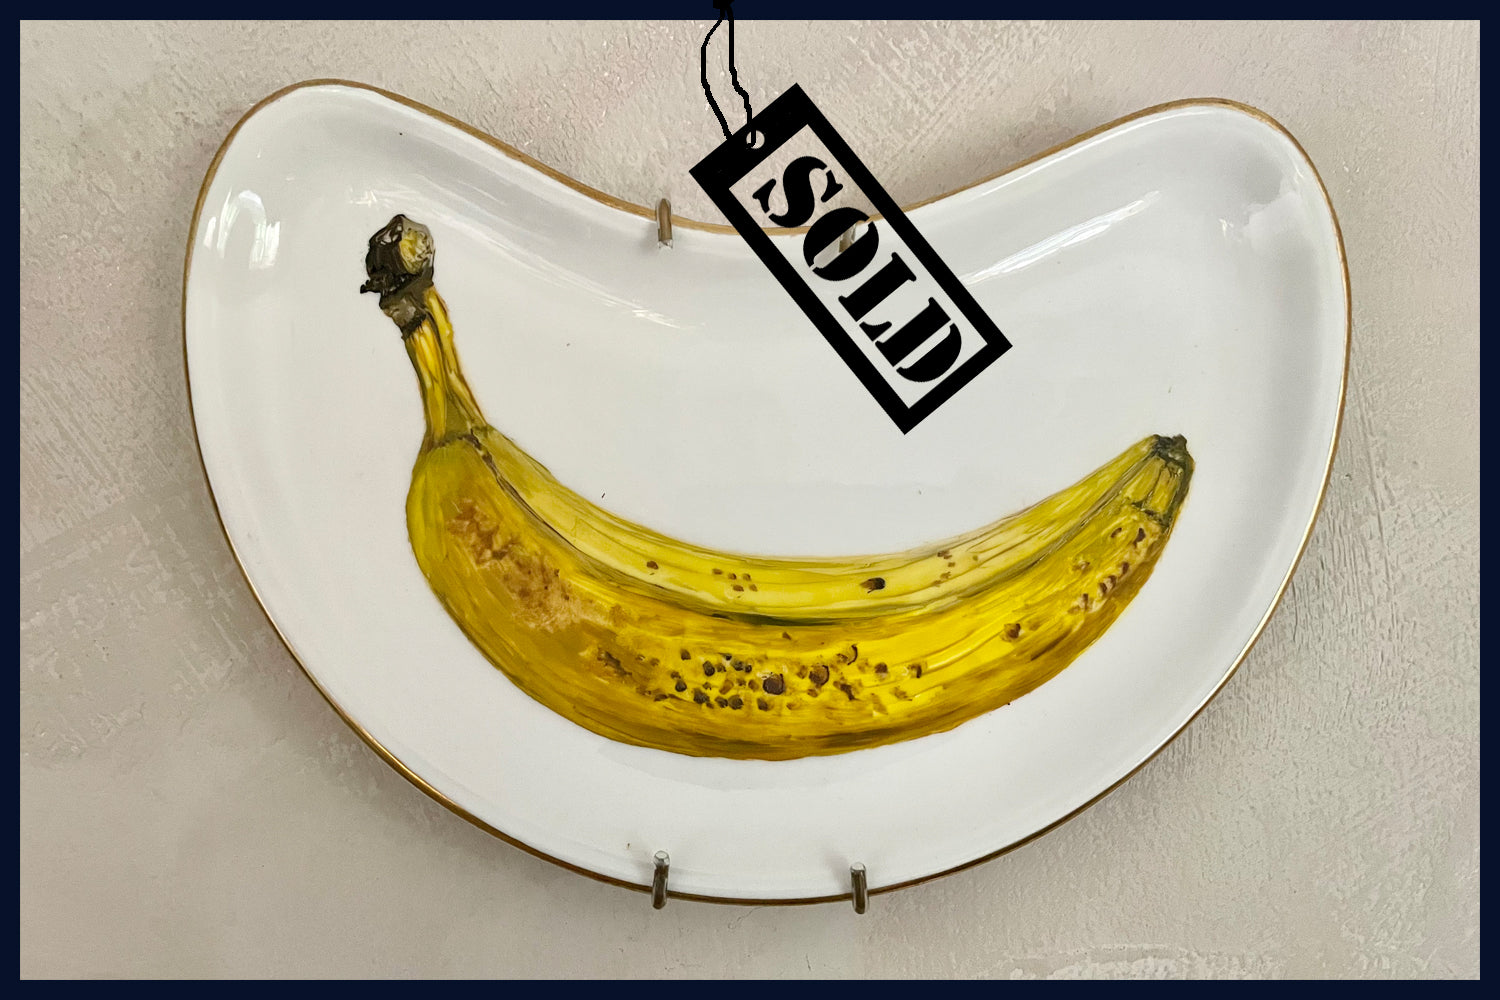 SOLD Plated: original fine art oil painting on a vintage side plate - banana